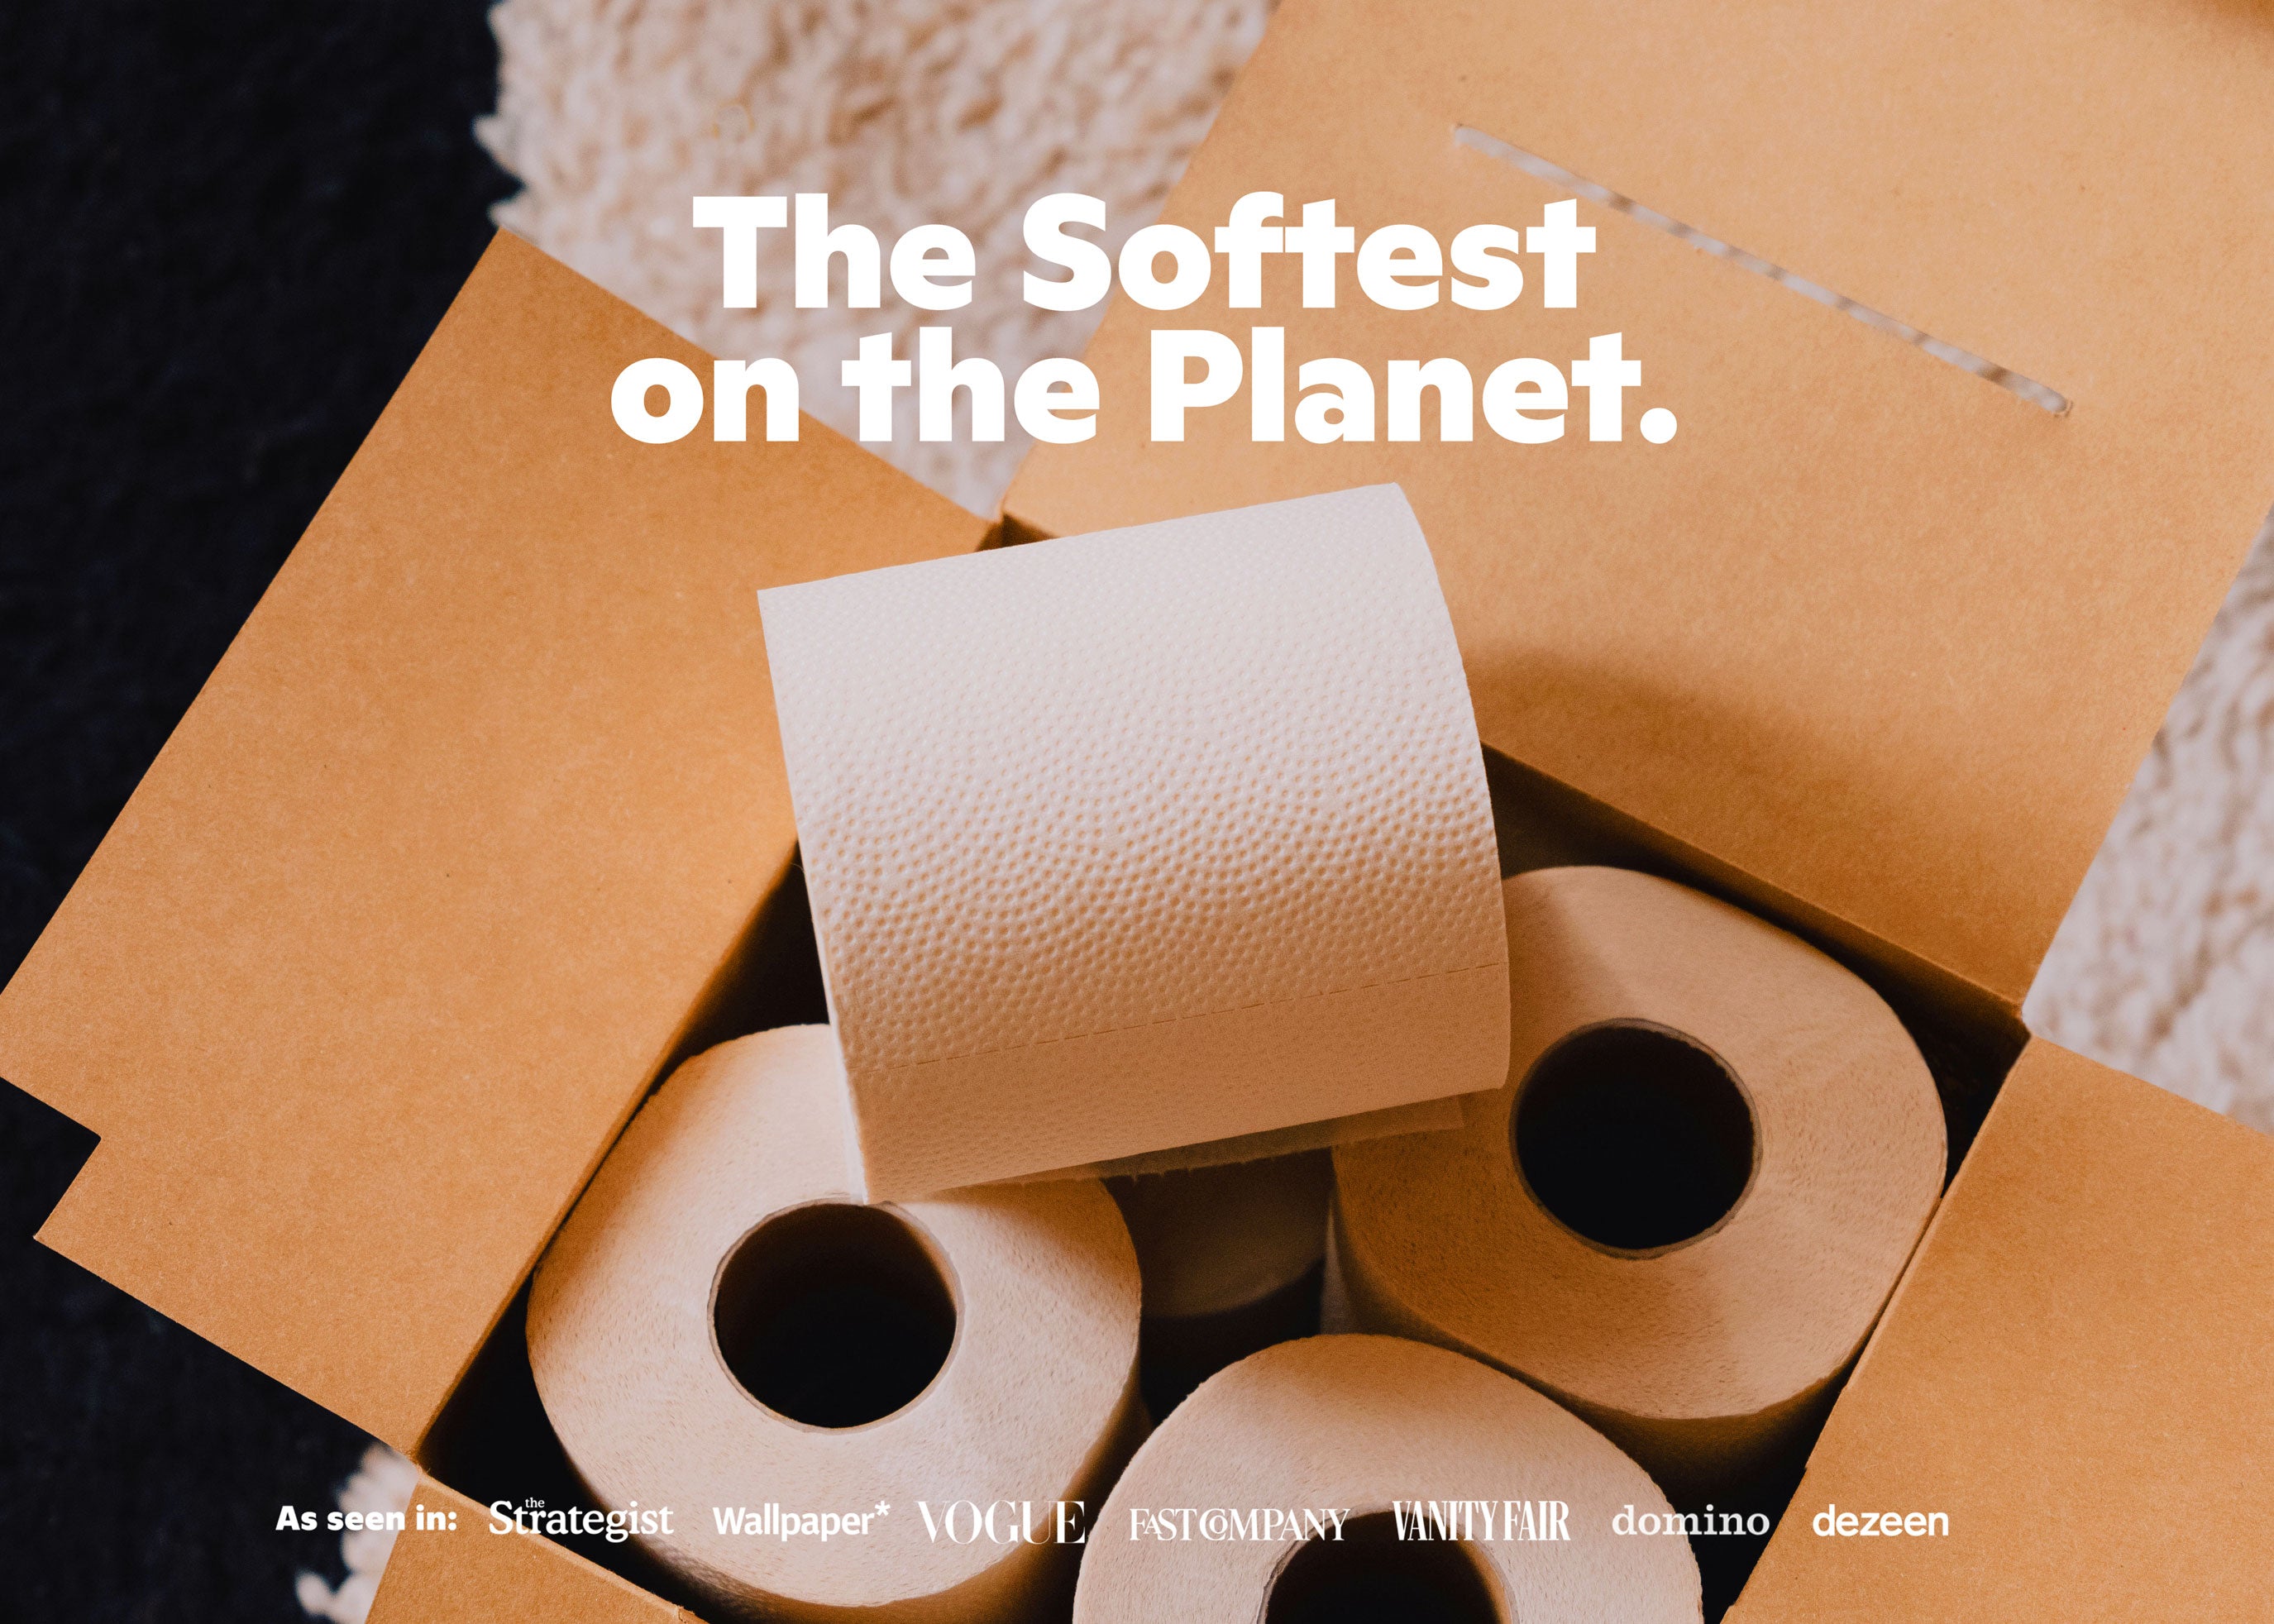 Industrial Paper Roll That Offers More Than Comfort 